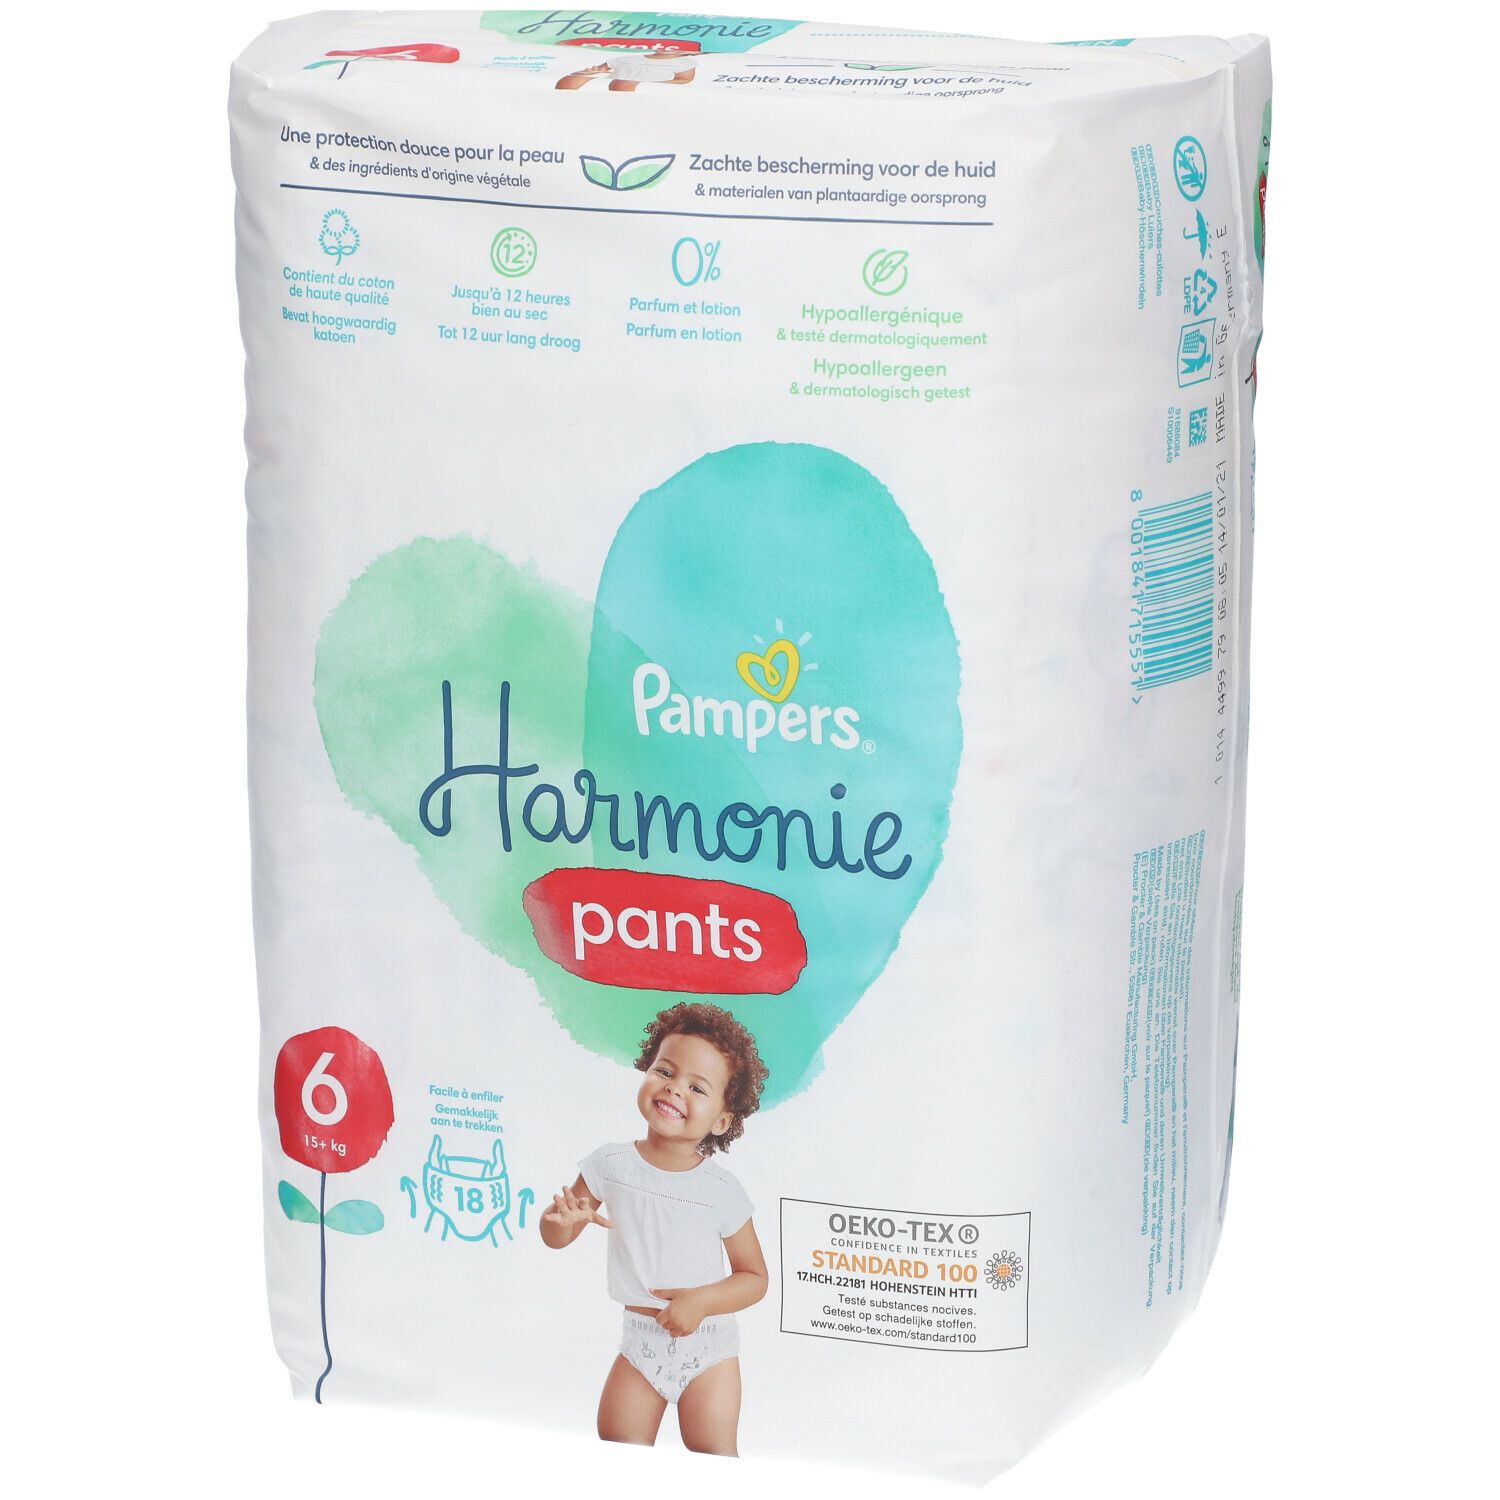 Pampers® Harmonie Pants Couches-culottes Taille 6, +15 kg